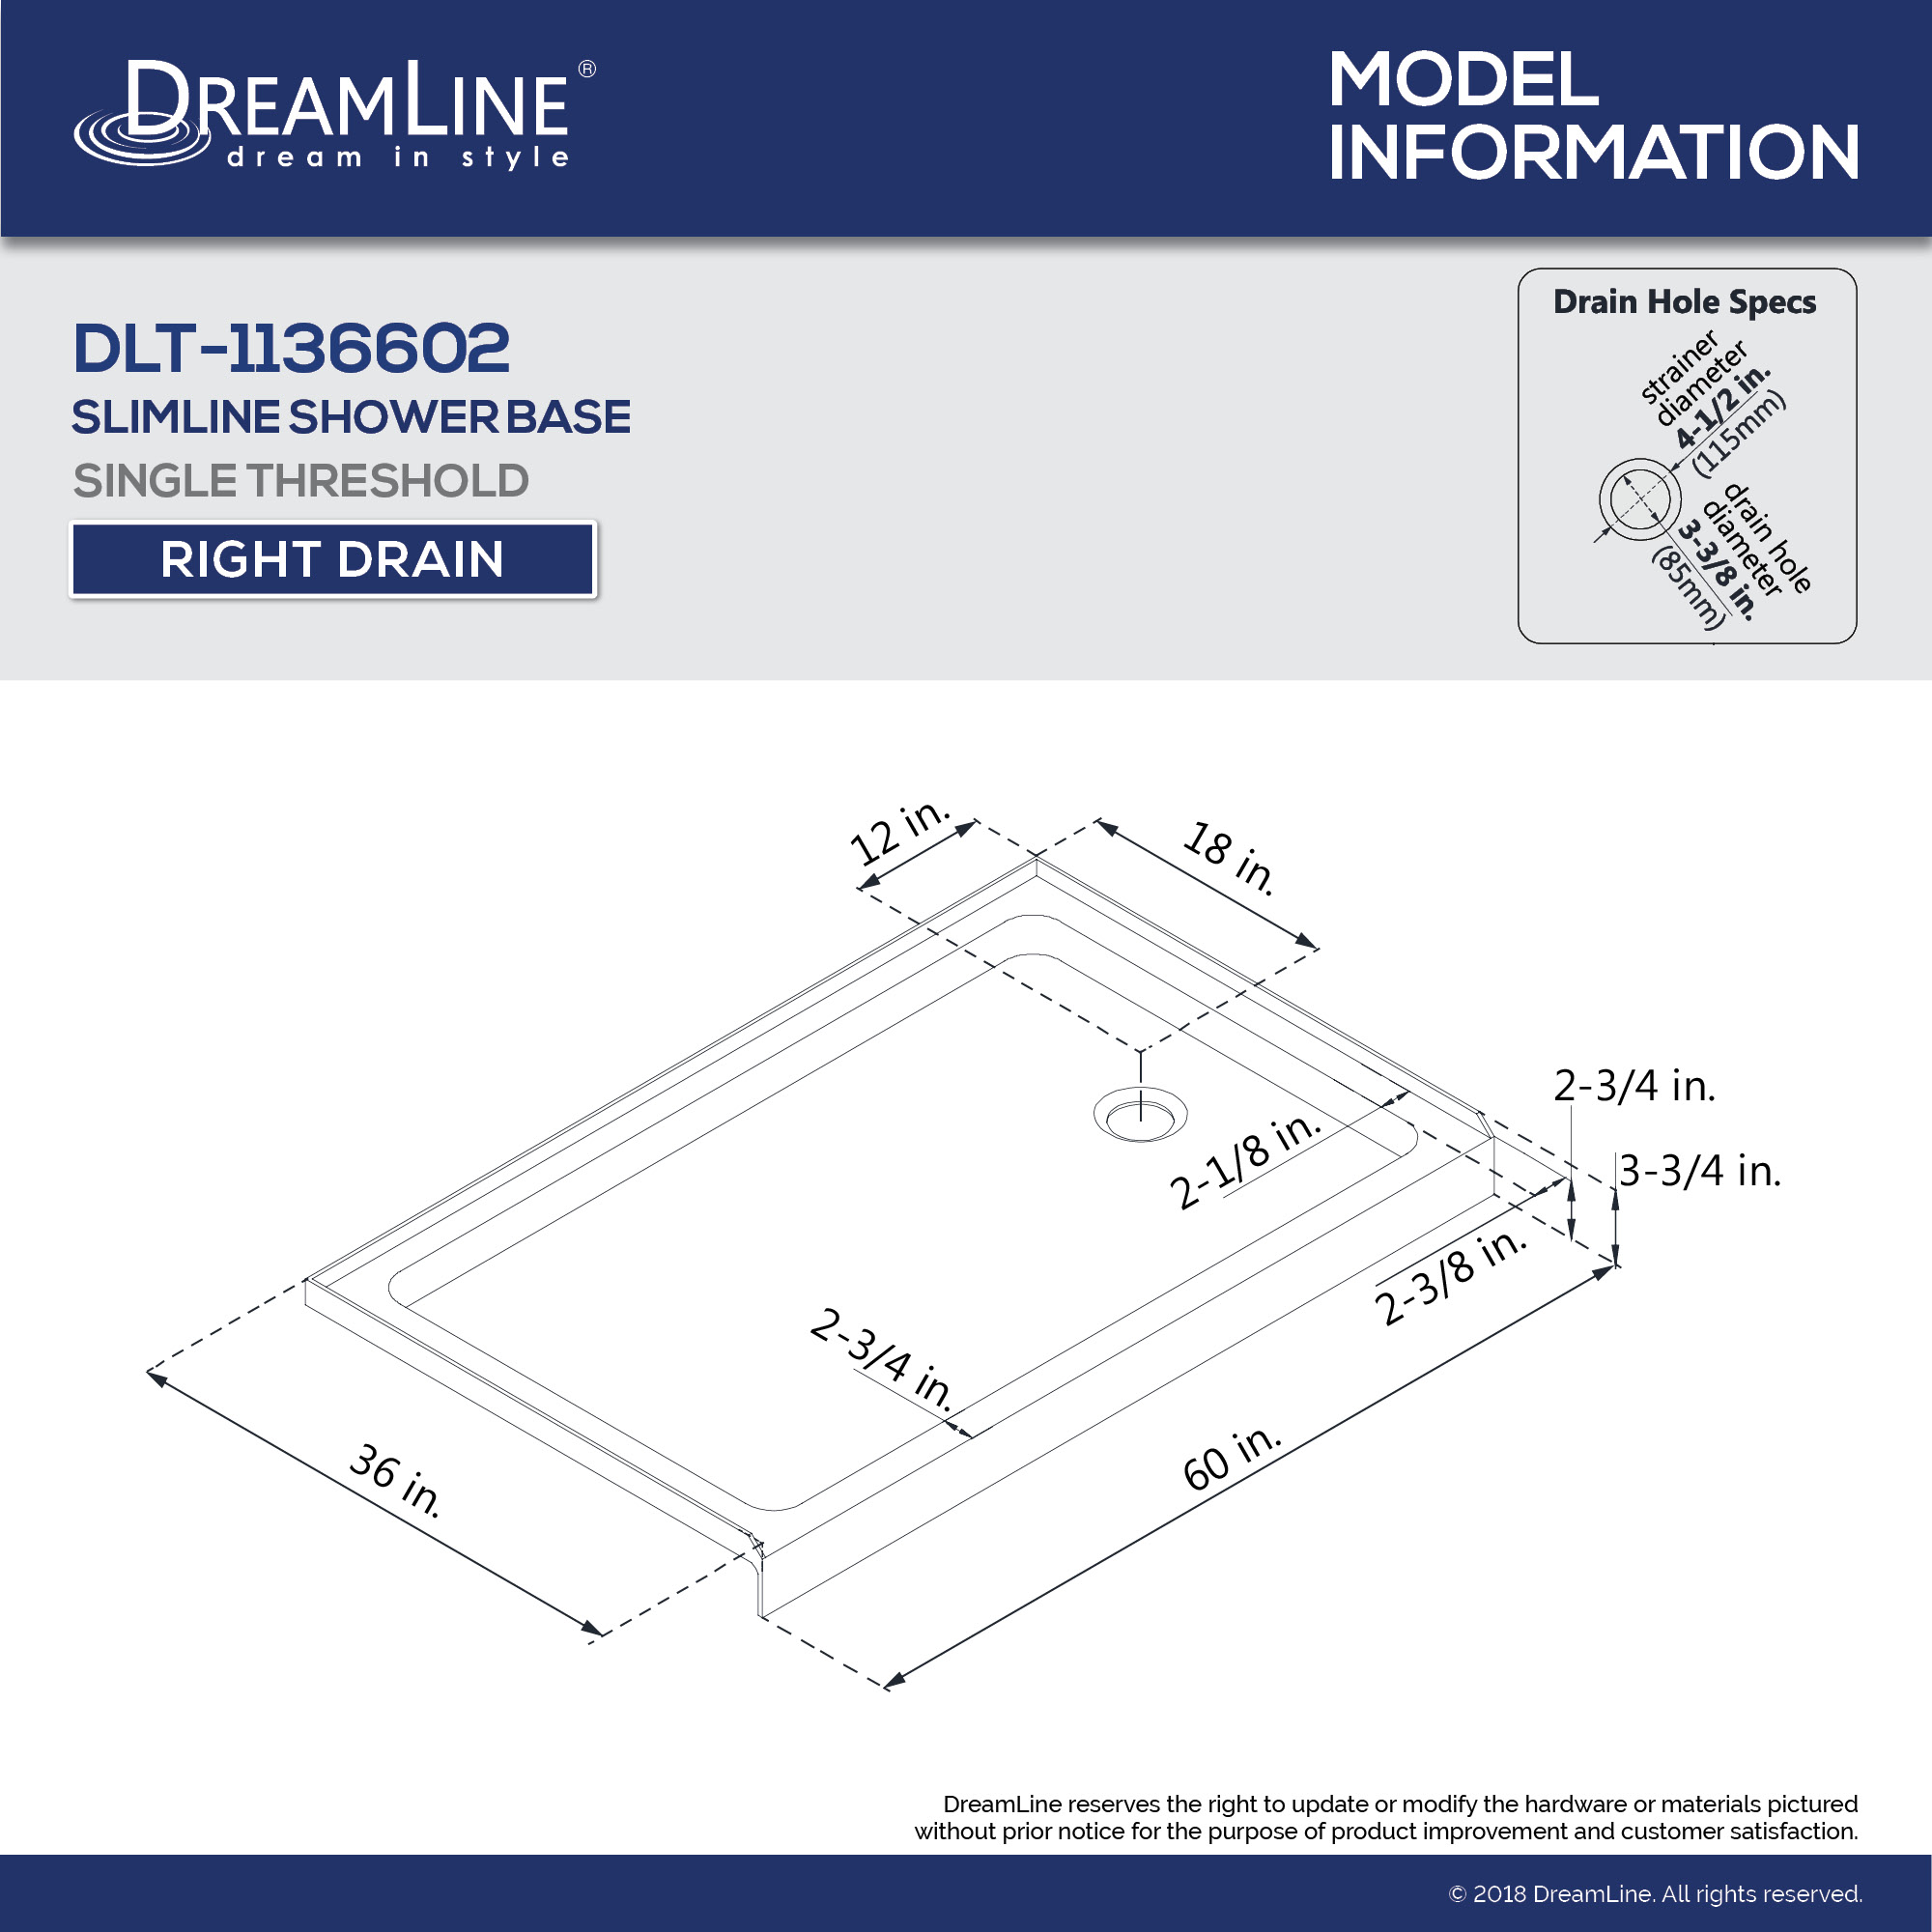 DreamLine Encore 36 in. D x 60 in. W x 78 3/4 in. H Bypass Shower Door in Chrome and Right Drain Biscuit Base Kit